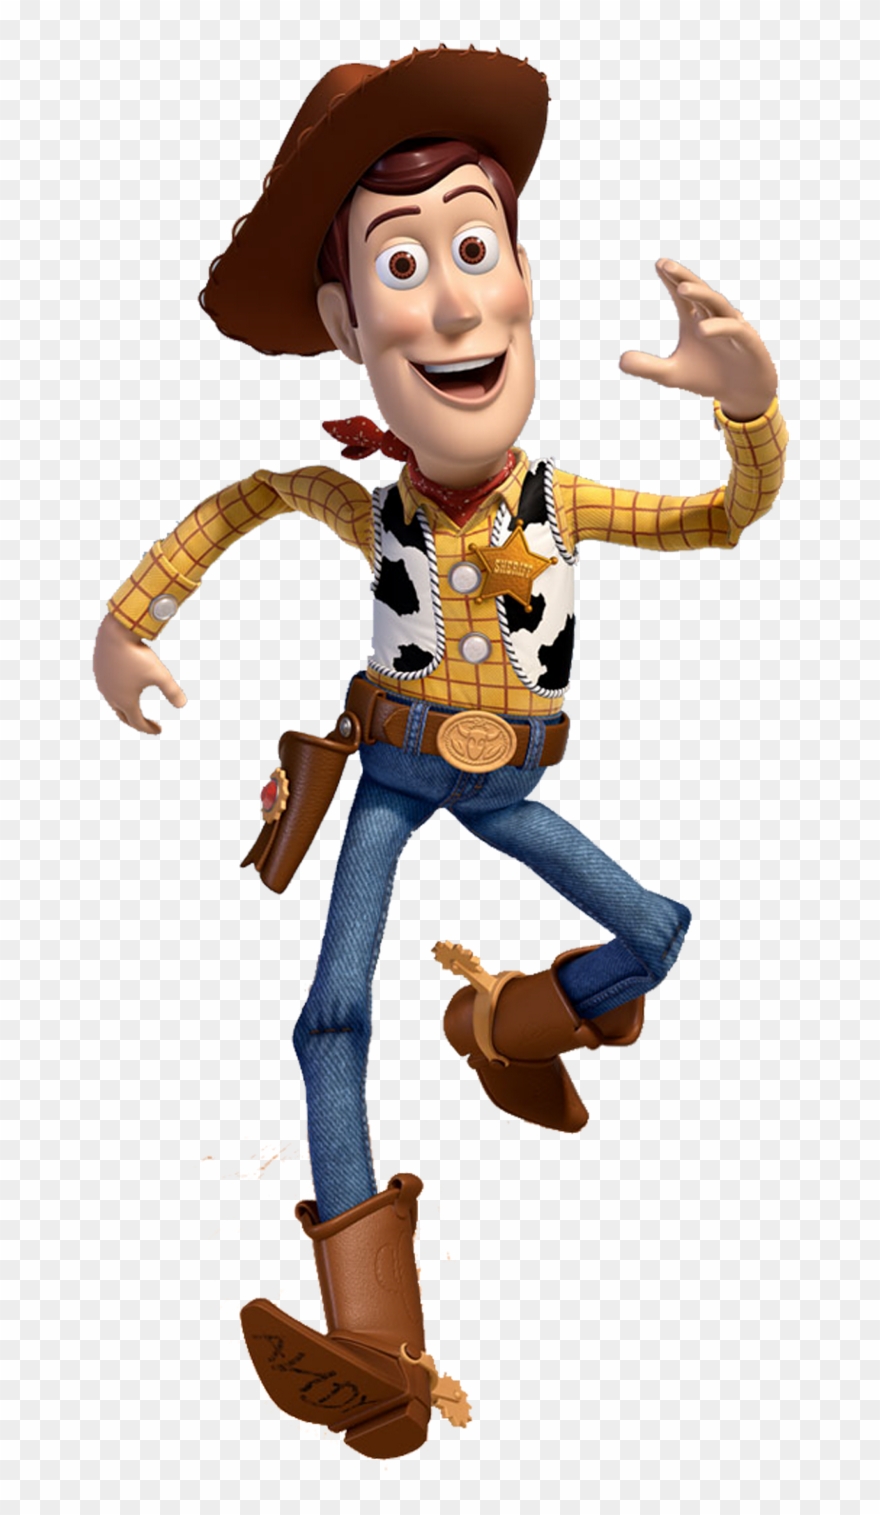 Woody Toy Story Characters Clipart.